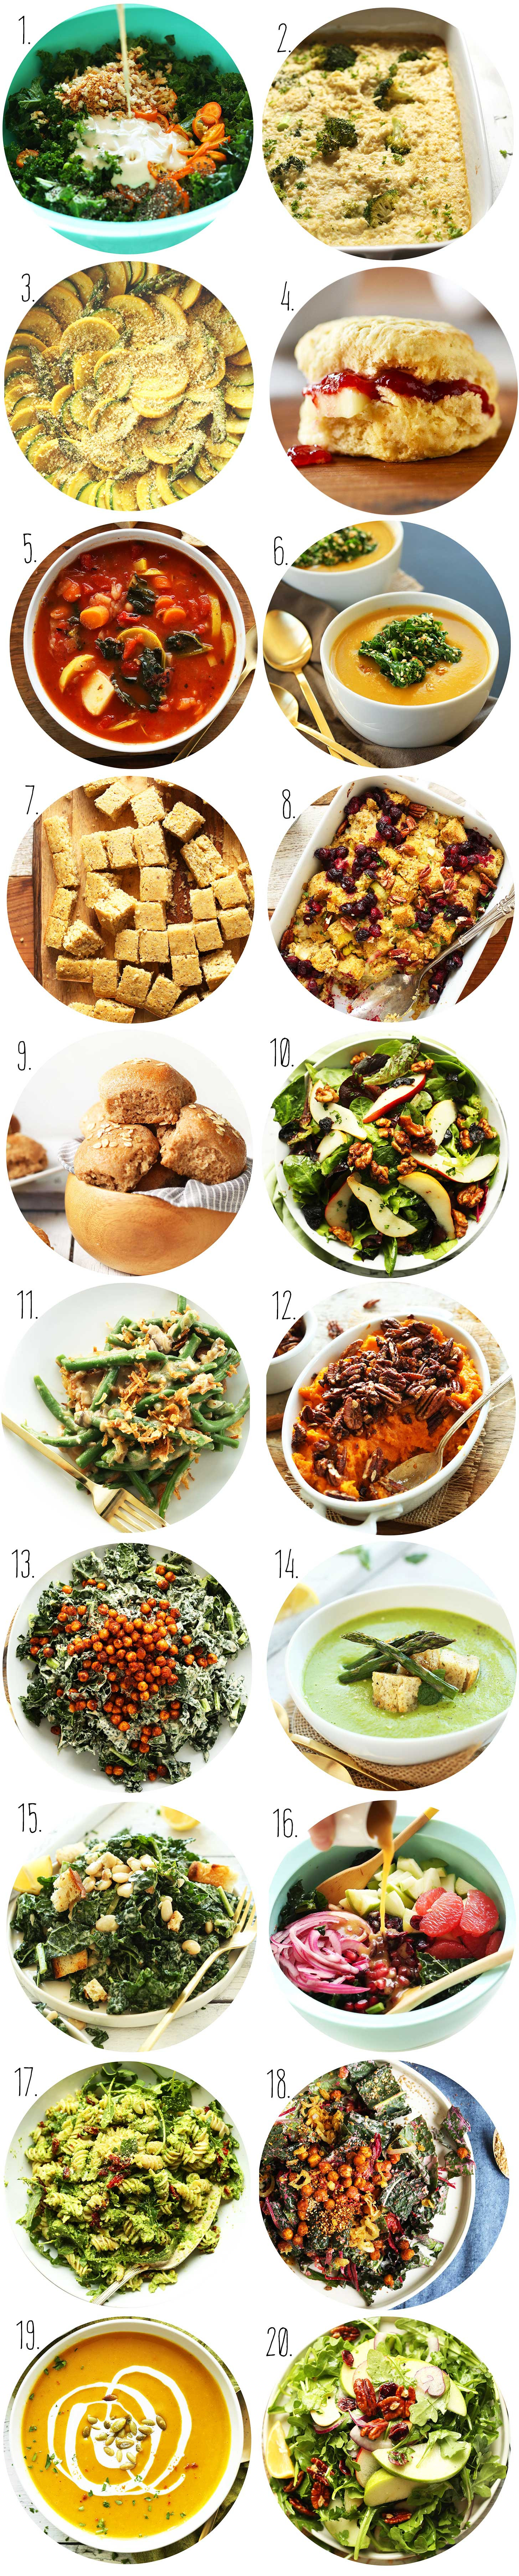 Vegan Christmas Side Dishes
 20 Vegan Holiday Side Dishes